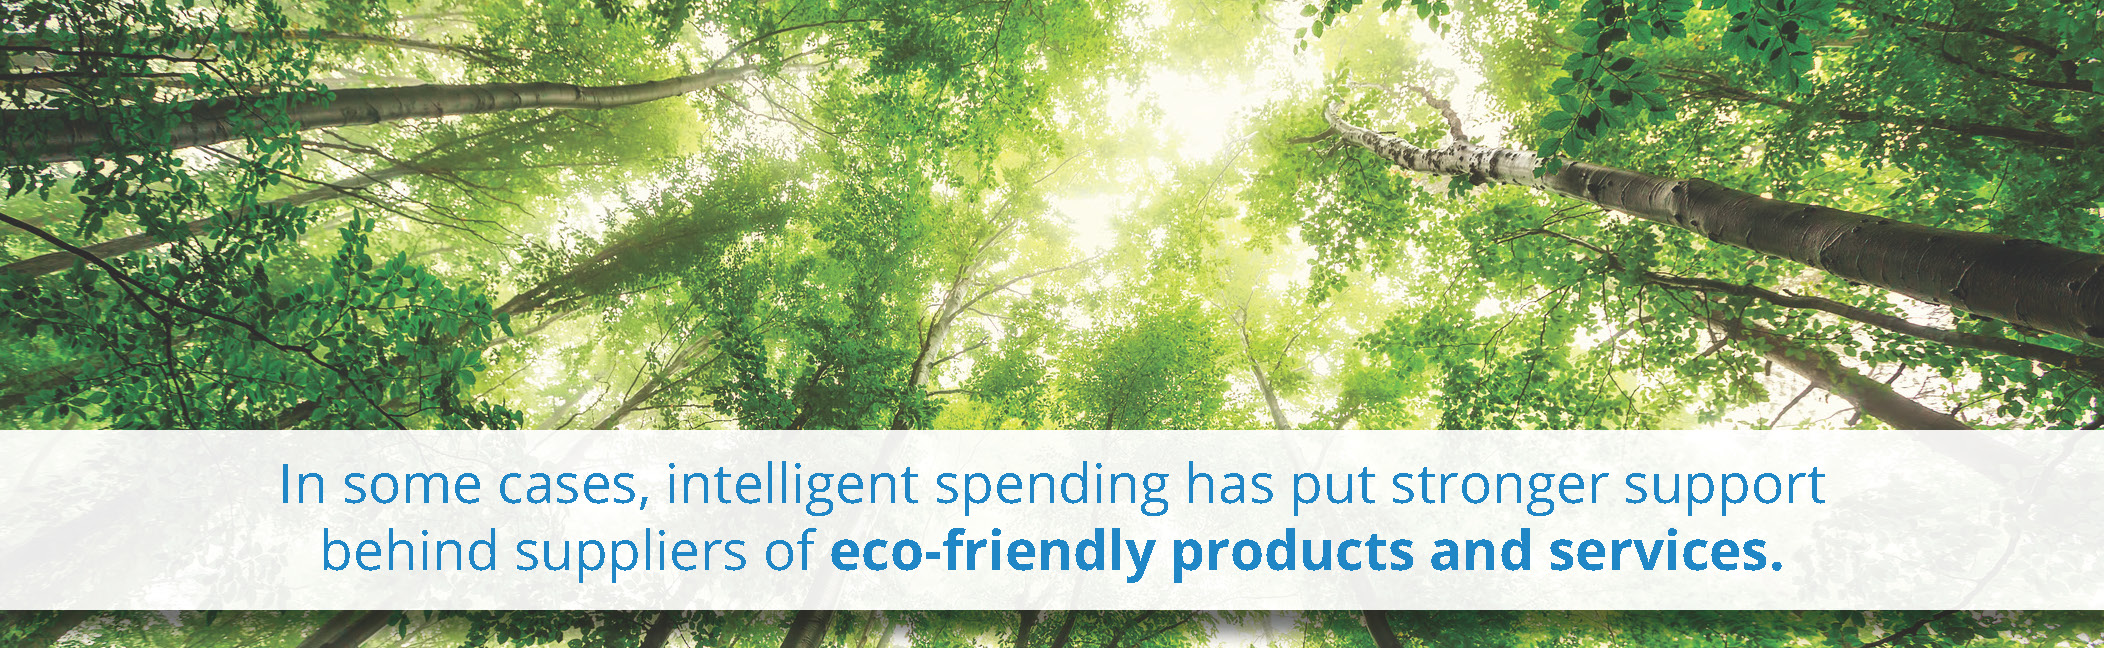 Intelligent Spending Puts Strong Support Behing Eco-Friendly Products And Services